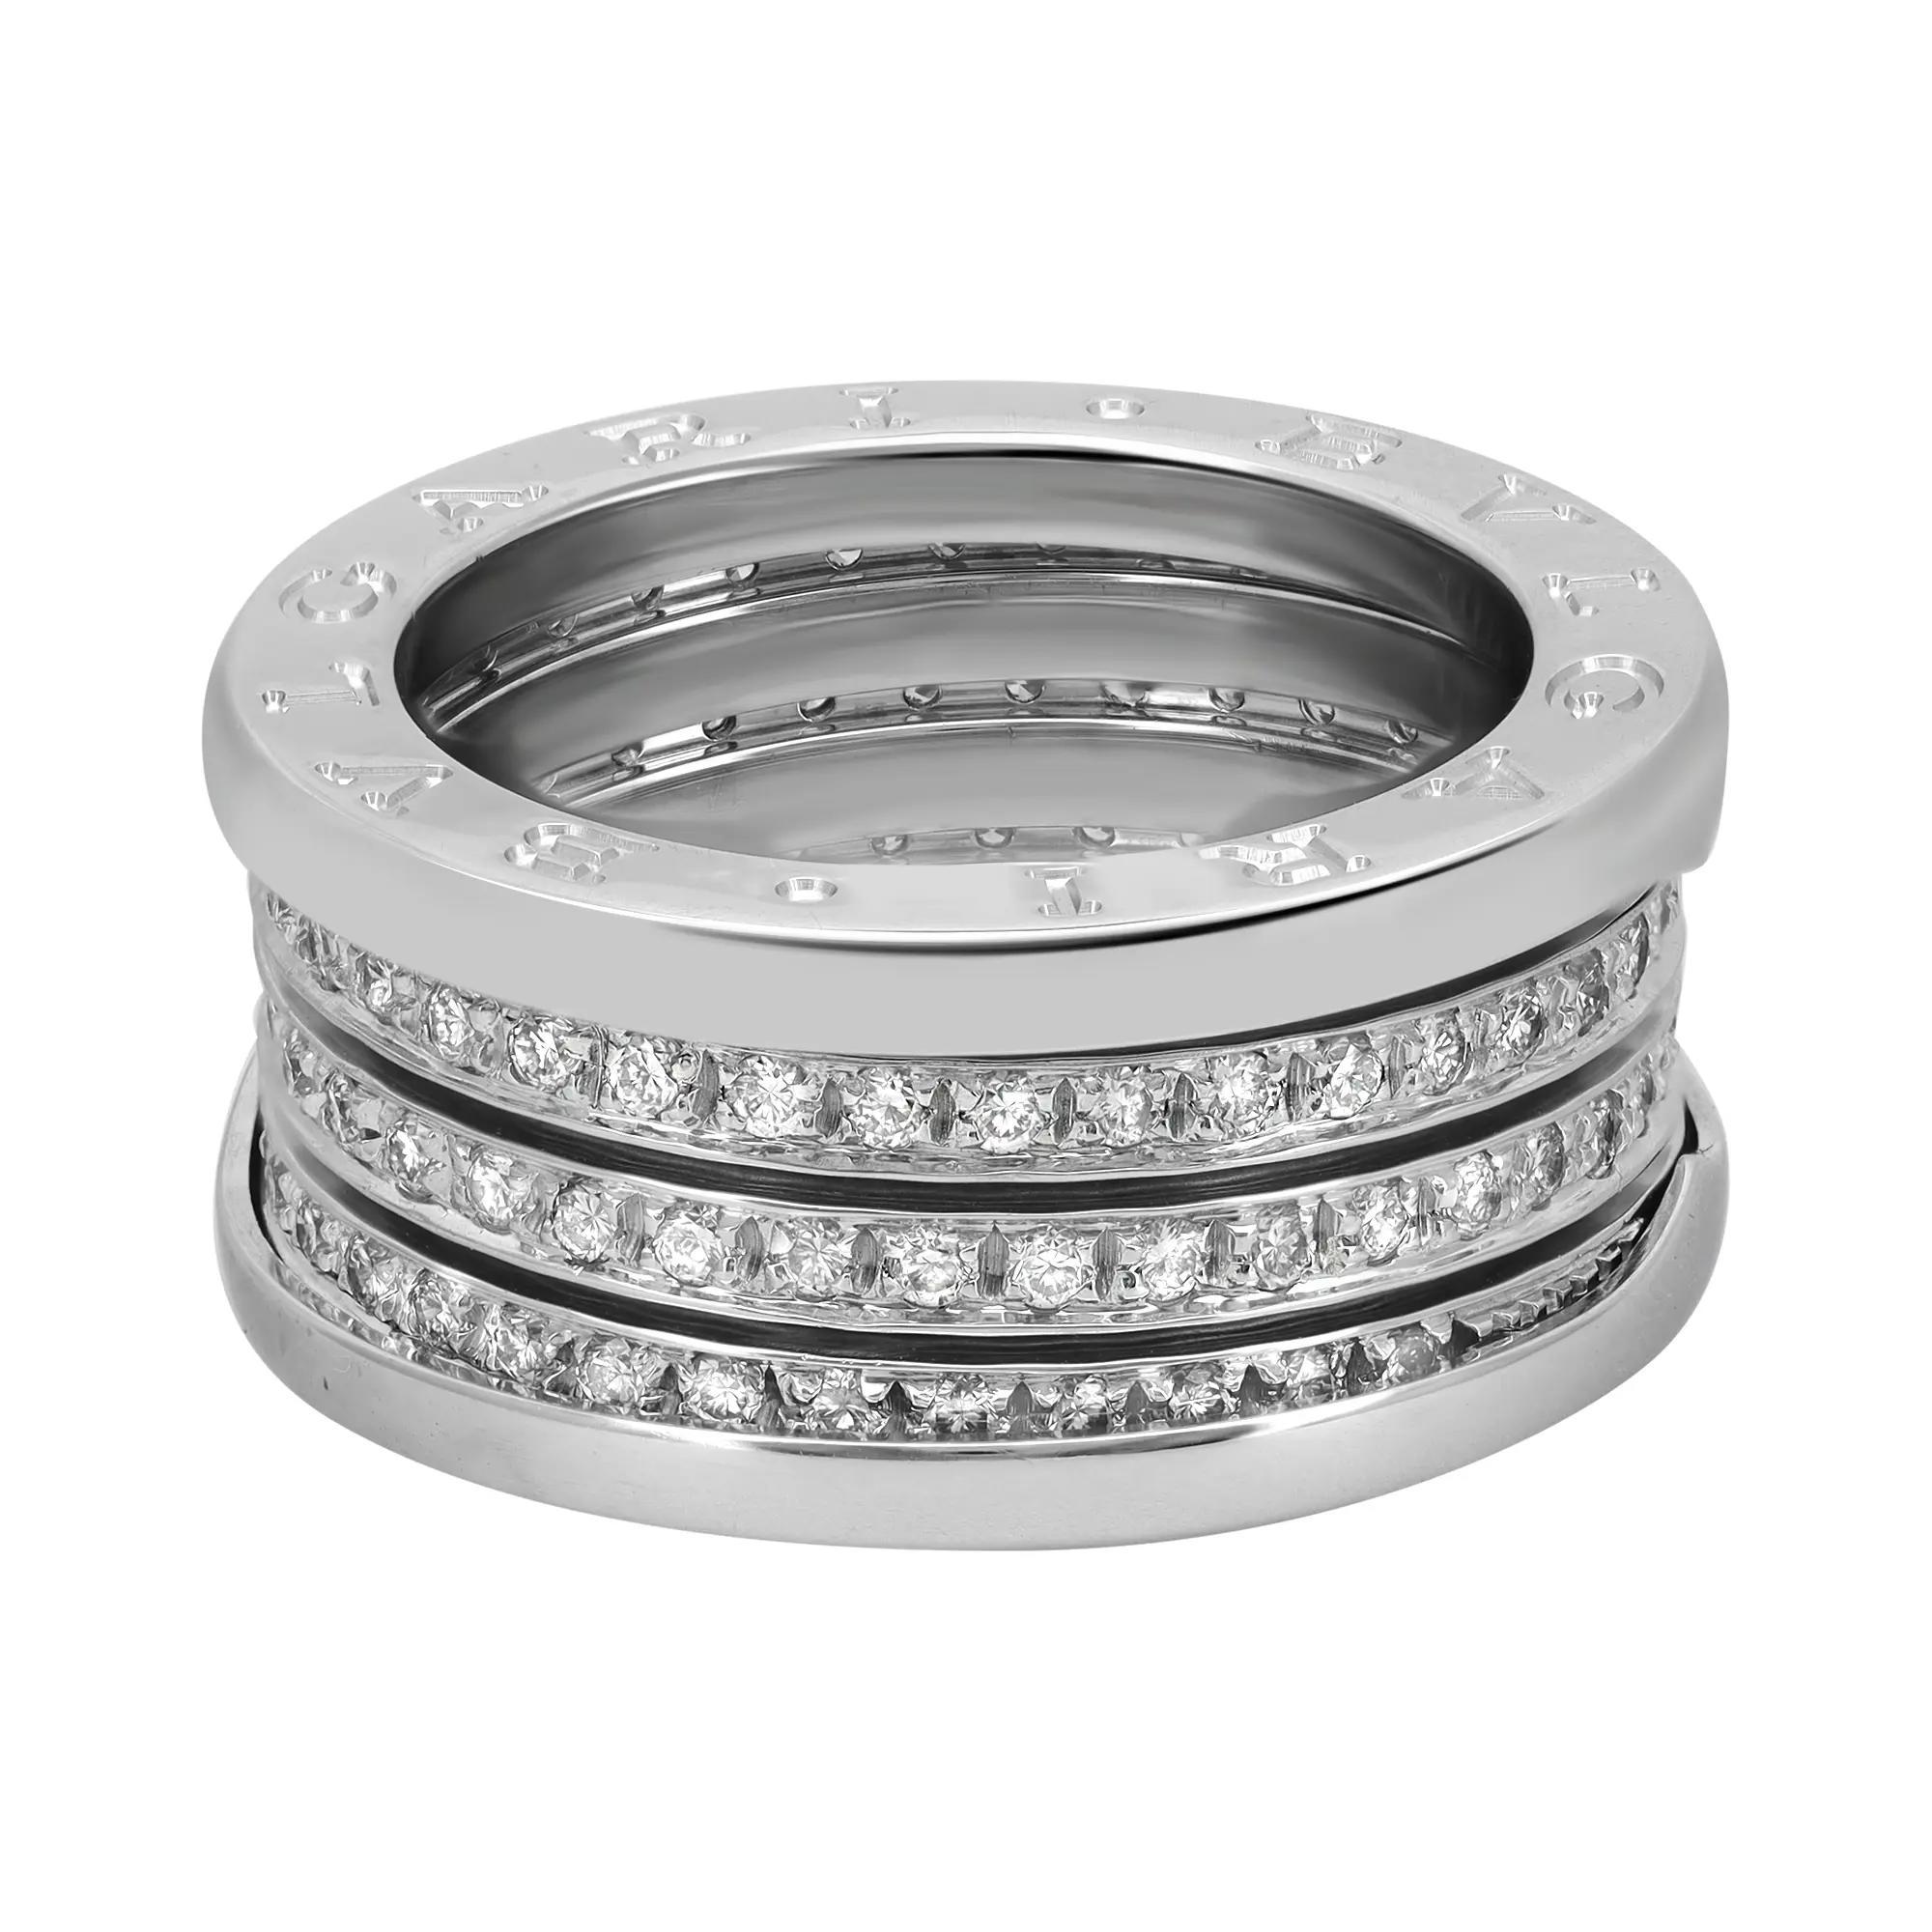 The B.Zero1 ring is a signature piece from the legendary jewelry design house Bvlgari. Crafted in fine 18K White Gold. It features a clean modern design with four internal spiral bands with pave set round cut diamonds weighing approximately 0.80